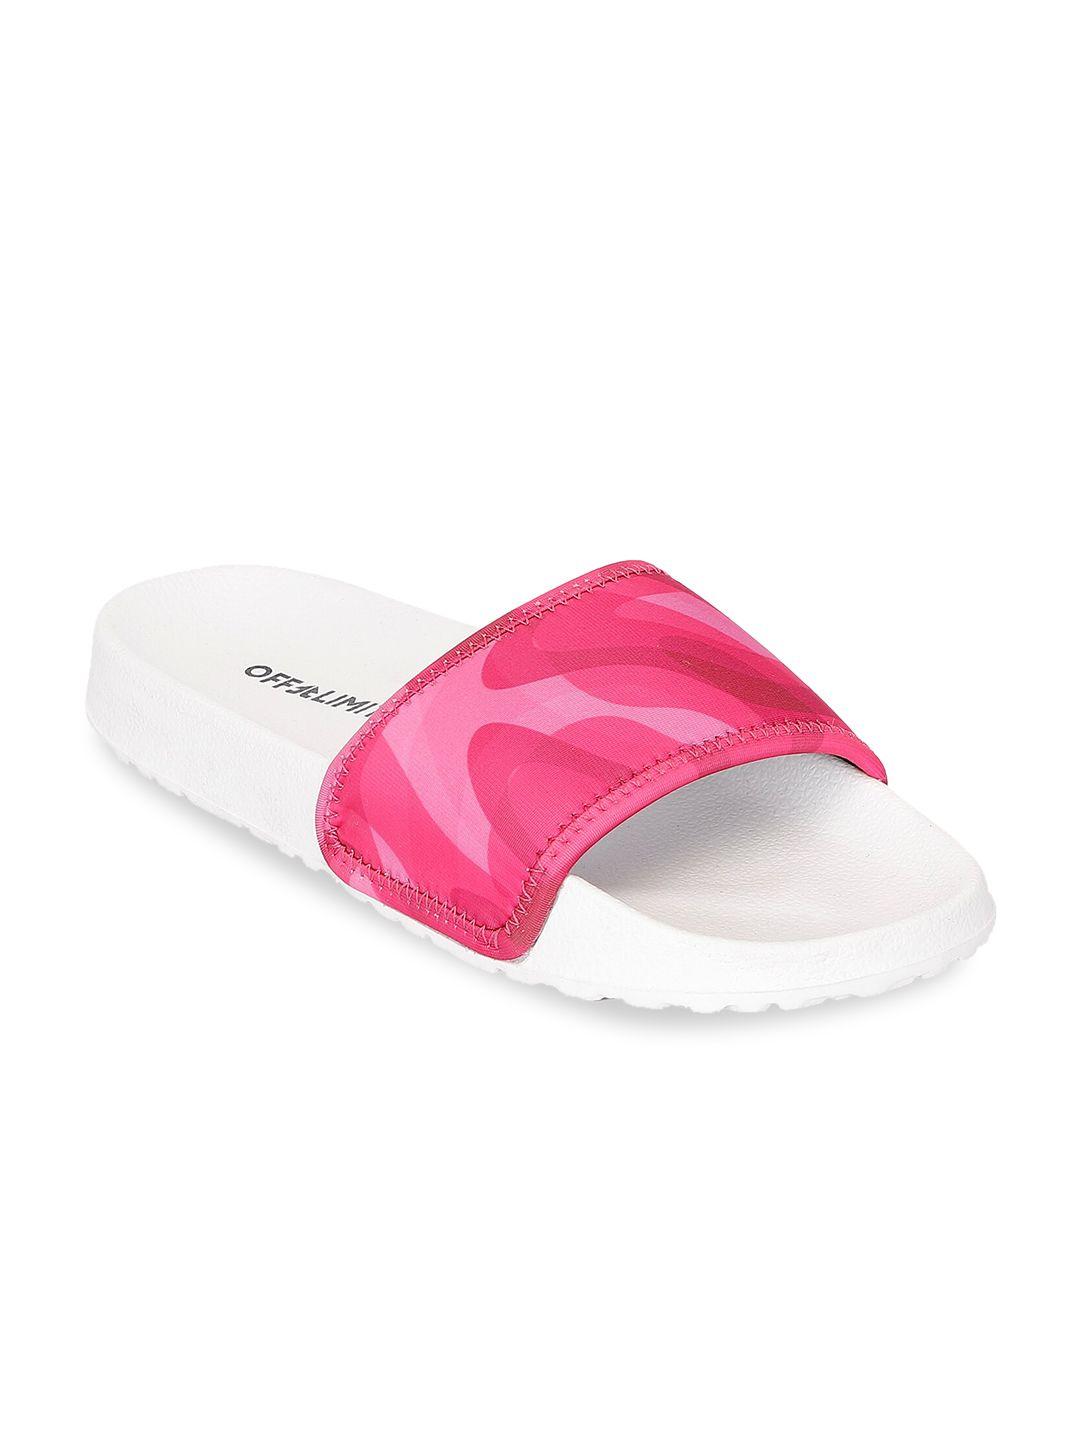 off limits women pink & white printed sliders